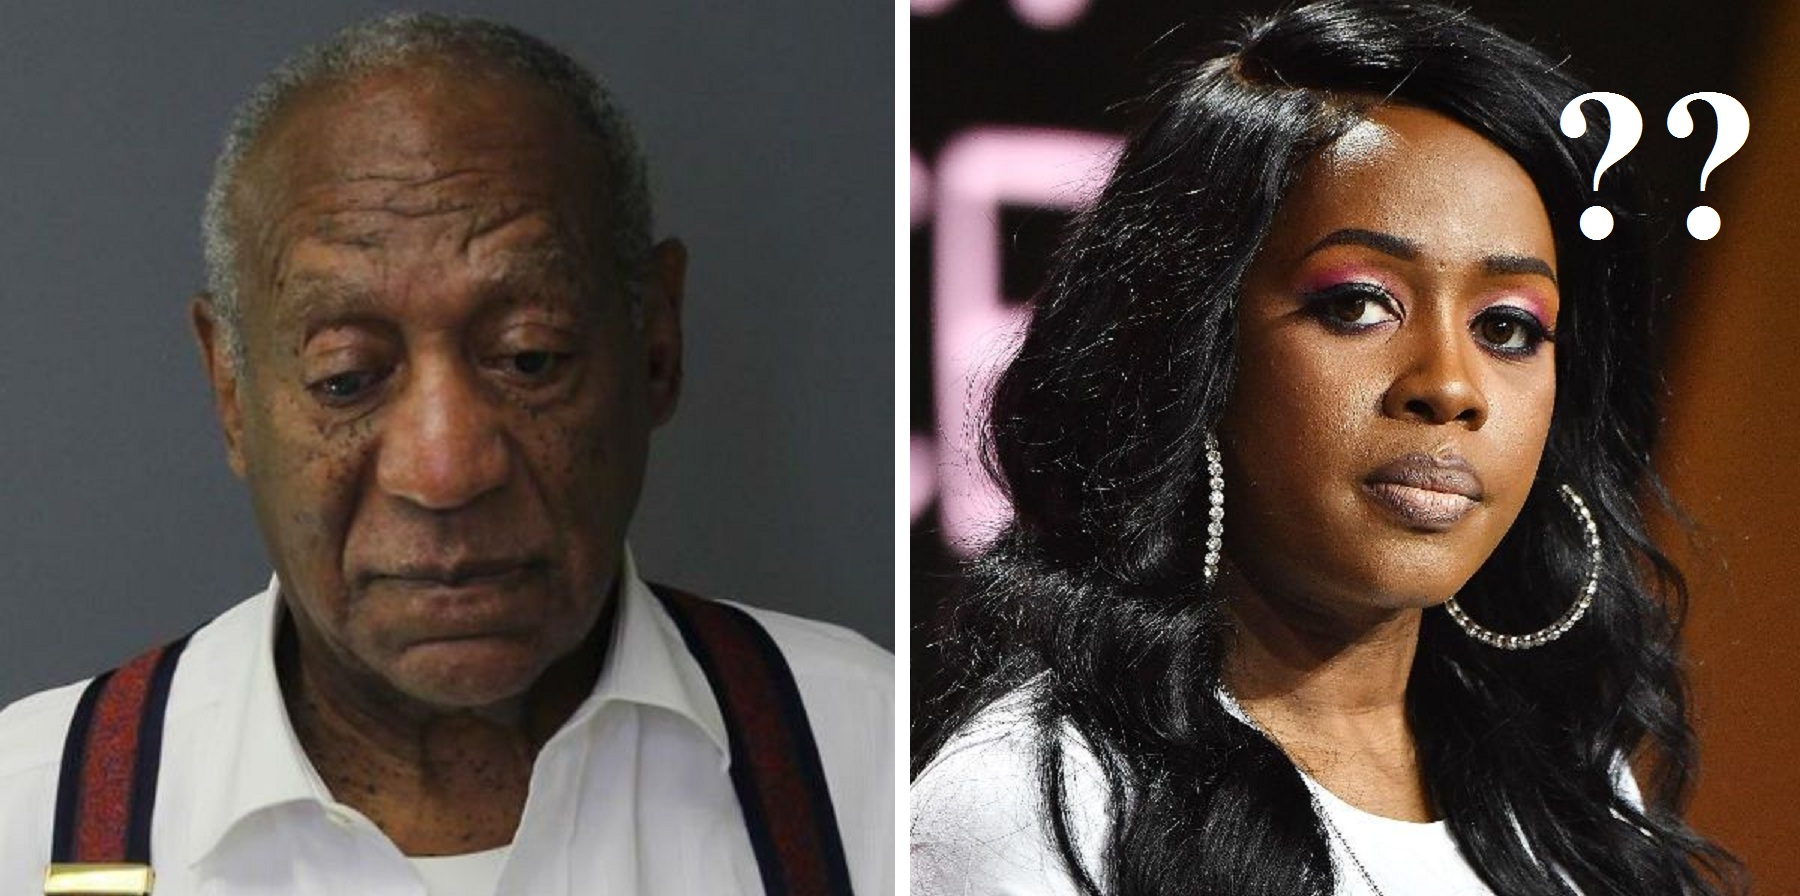 Rapper Remy Ma Defends Bill Cosby, Insists He was “Targeted’ because of Racism!